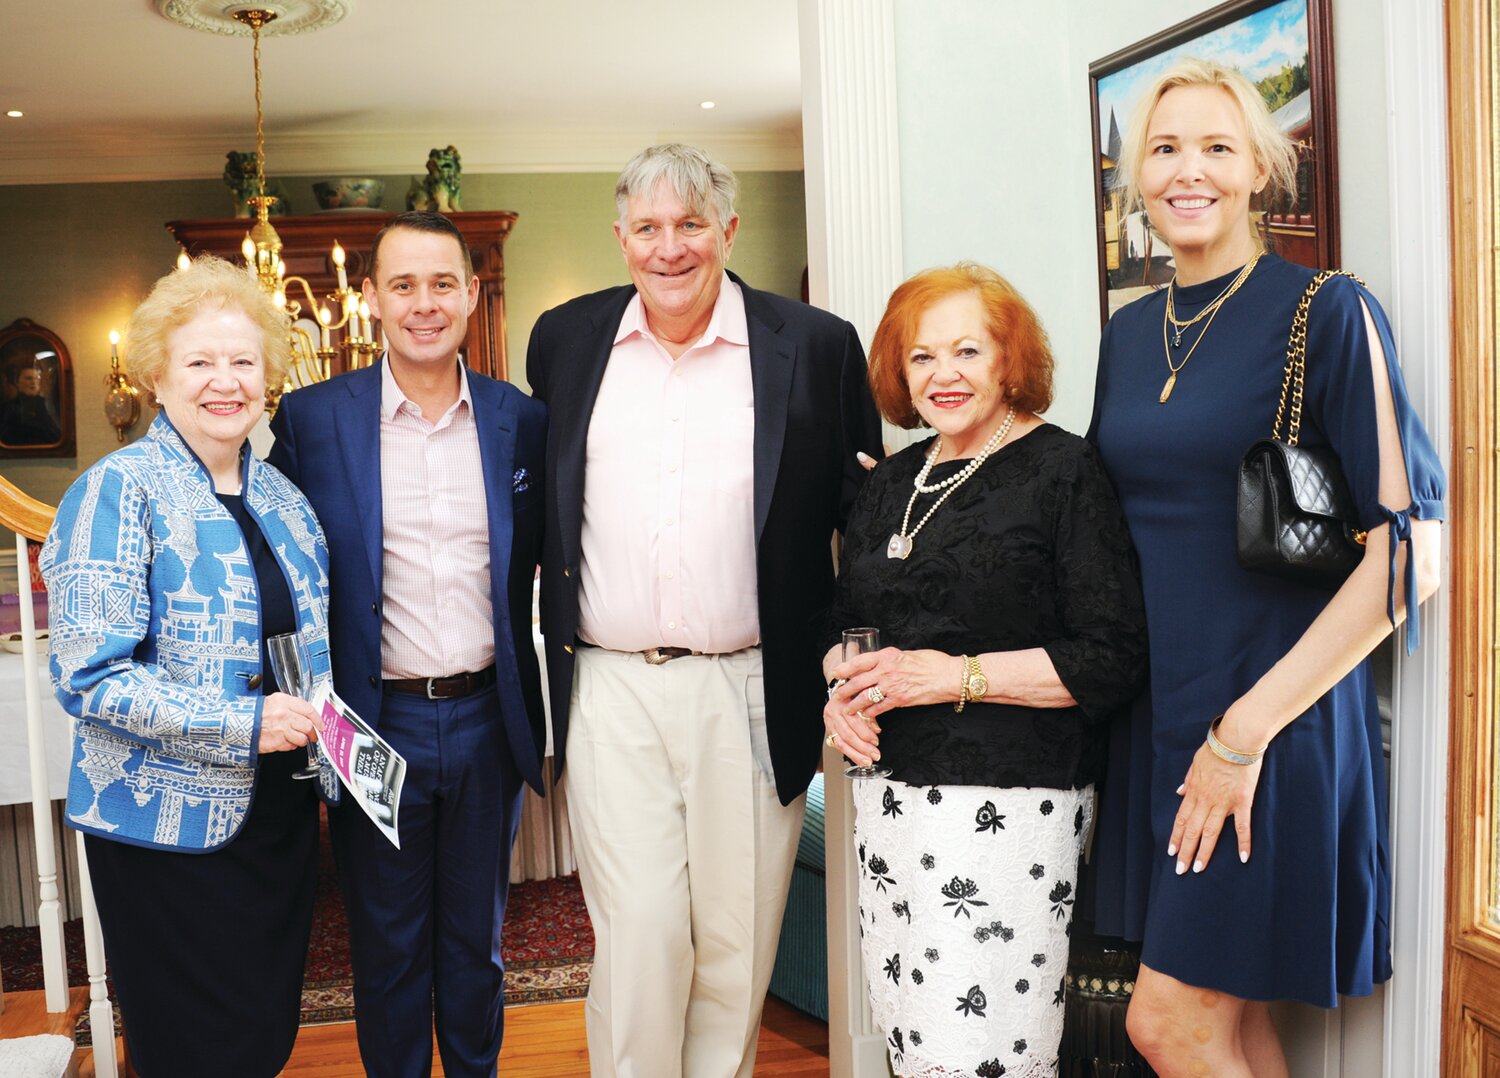 From left, Susan Kane, vice chair and treasurer of the Academy of Vocal Arts, Scott Guzielek, president and artistic director, Harold F. (Rick) Pitcairn, chairman of Academy of Vocal Arts board, board member Barbara Donnelly Bentivoglio, and Dr. Megan Sage pose for a photograph at Bentivoglio’s home.